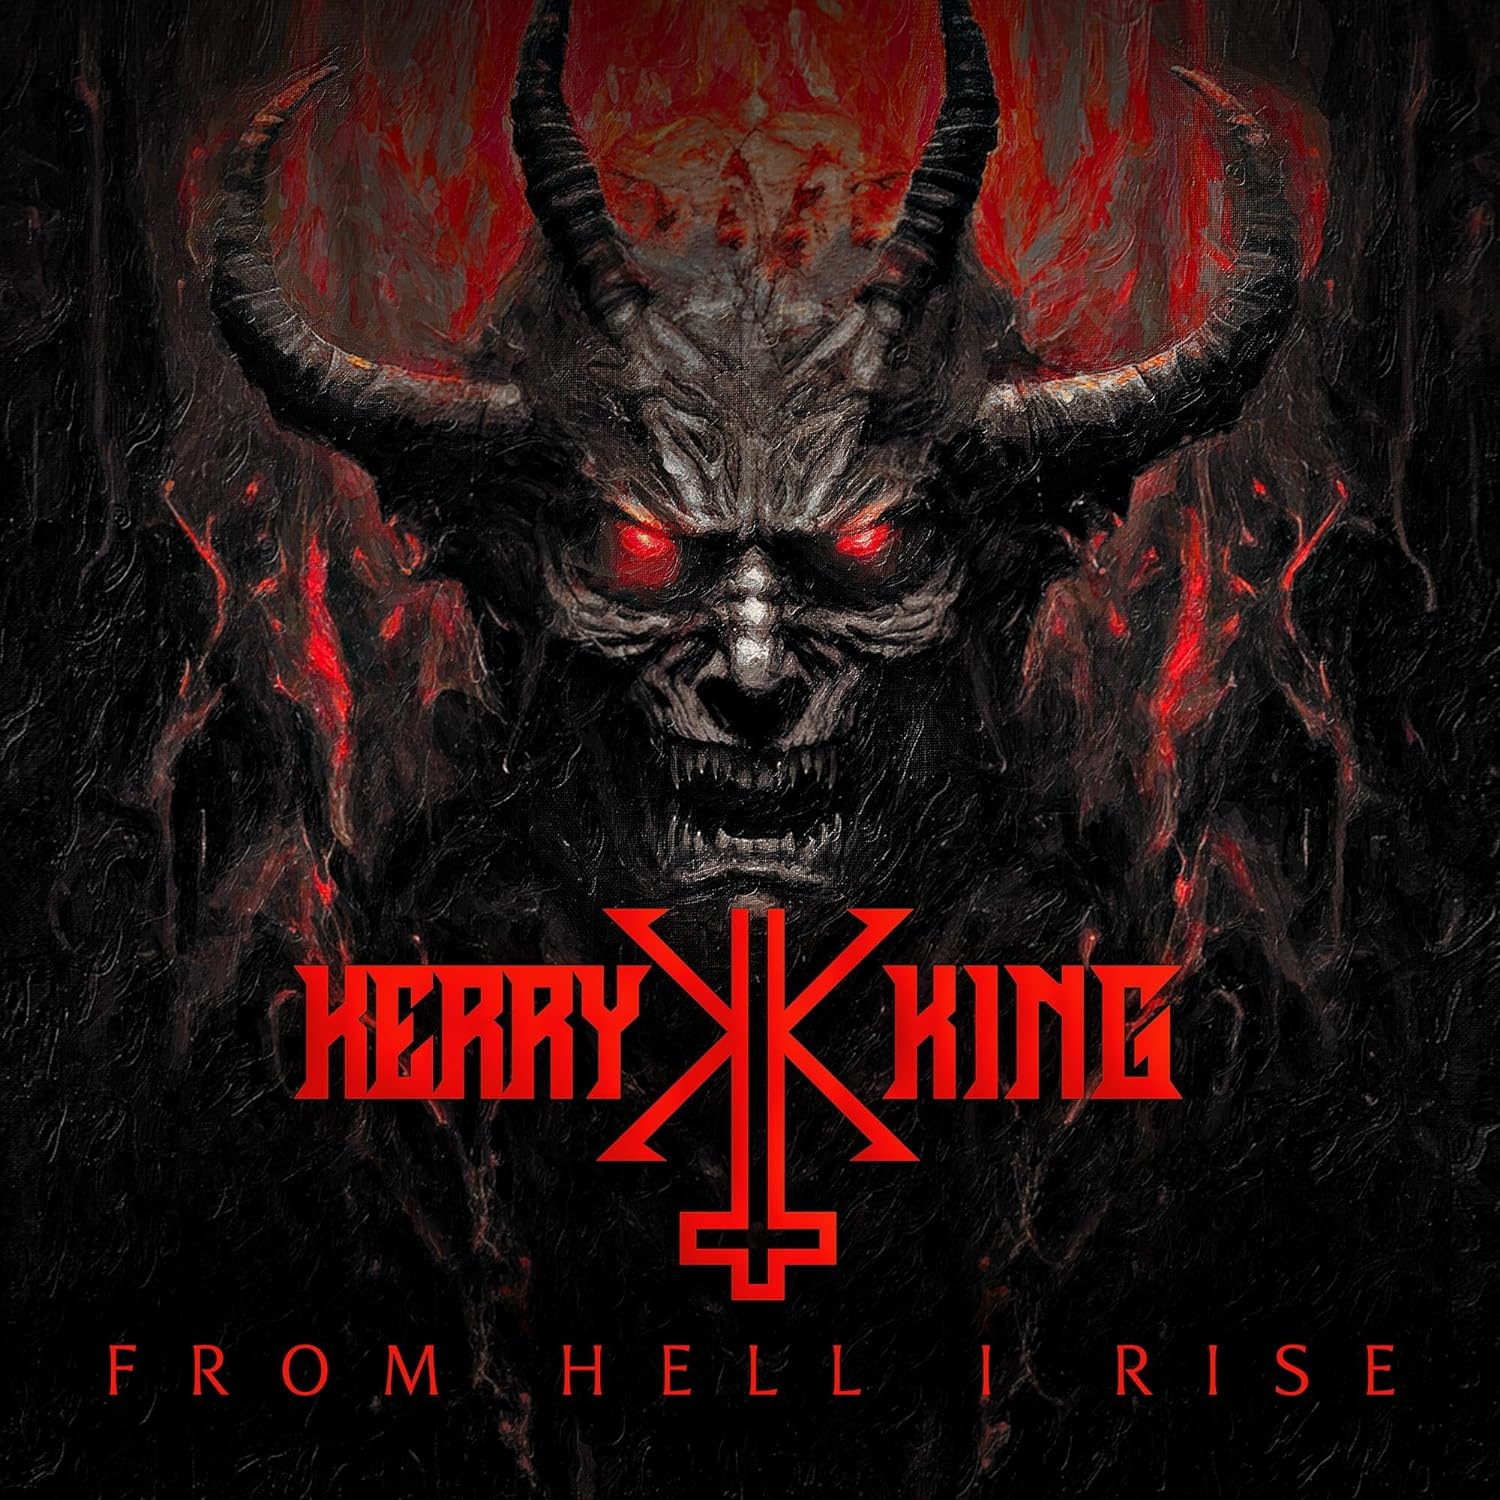 Kerry King - From Hell I Rise.